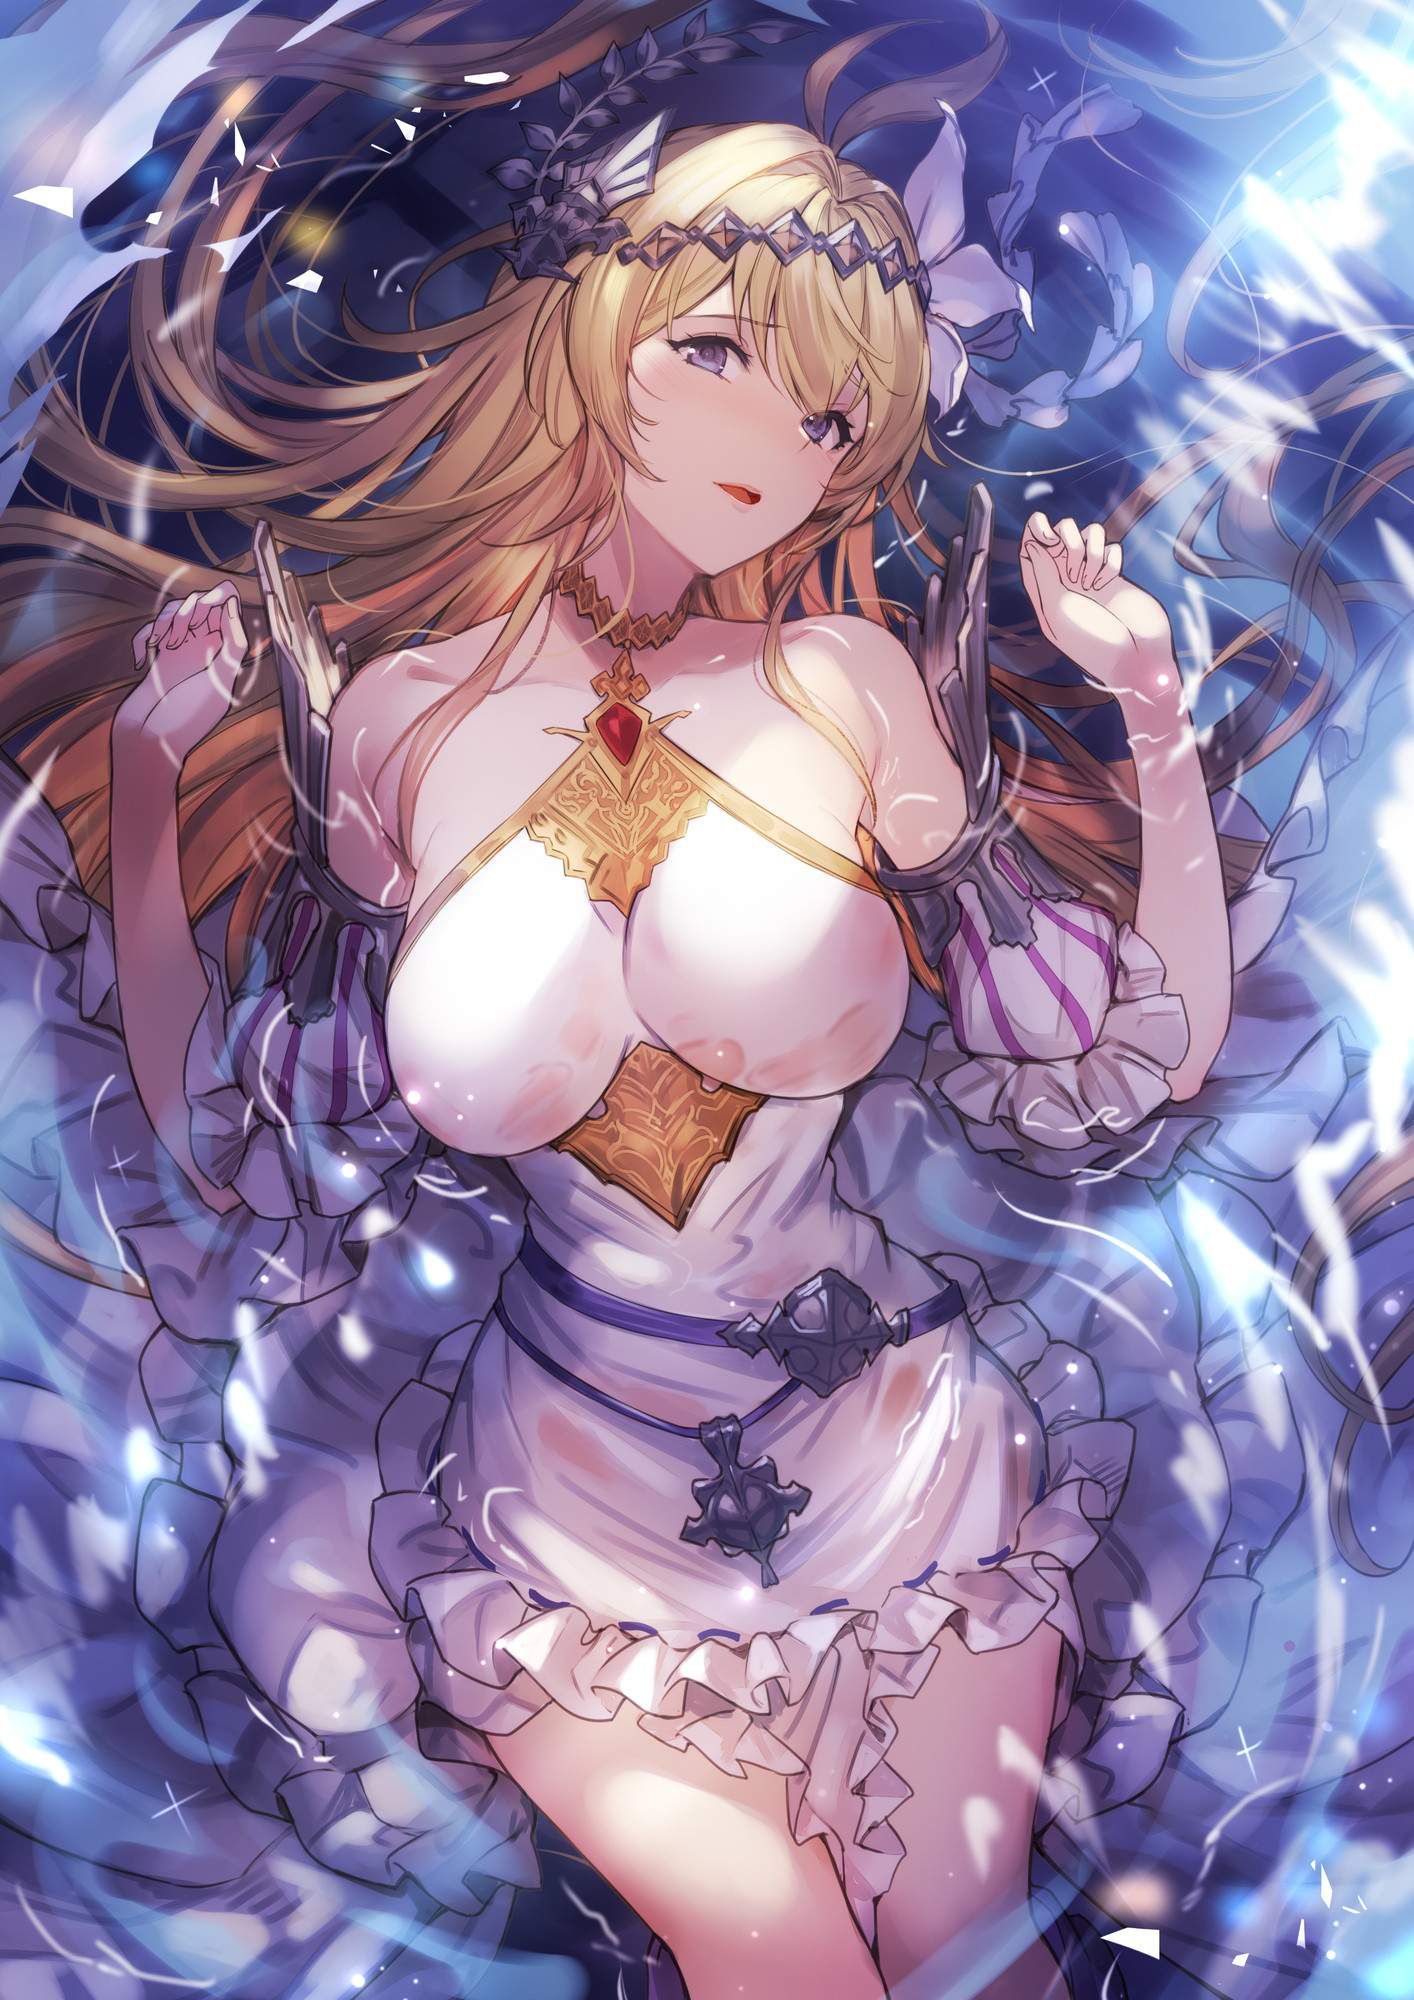 Jeanne Darc's free erotic image summary that makes you happy just by looking at it! (Granblue Fantasy) 3